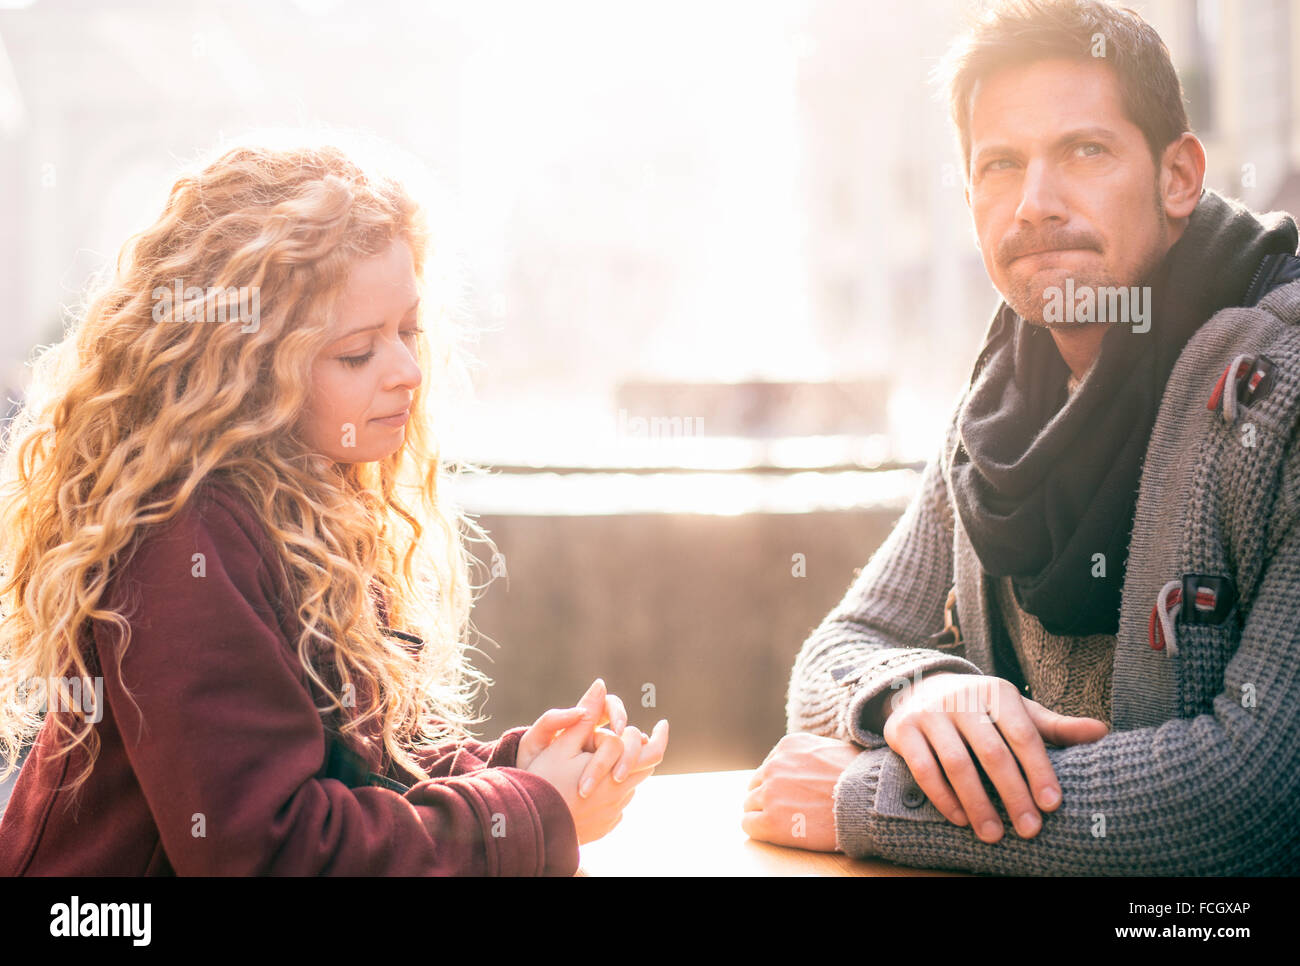 Displeased couple sitting together at a table Stock Photo